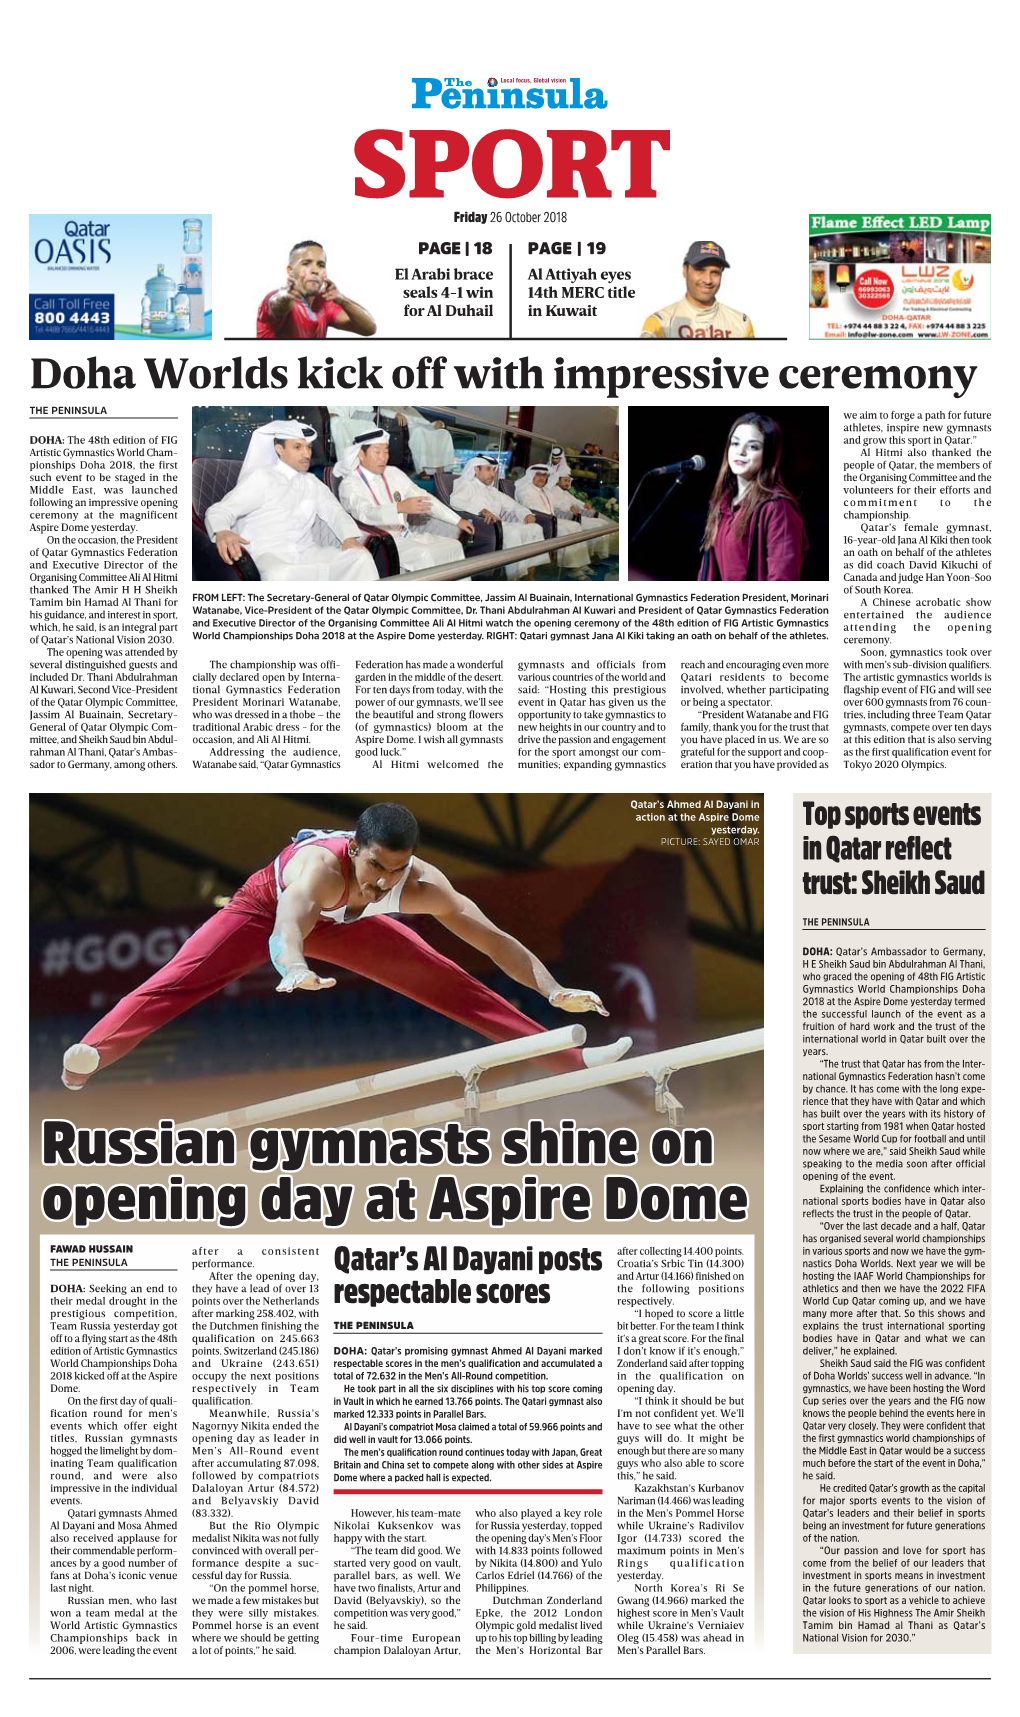 Russian Gymnasts Shine on Opening Day at Aspire Dome